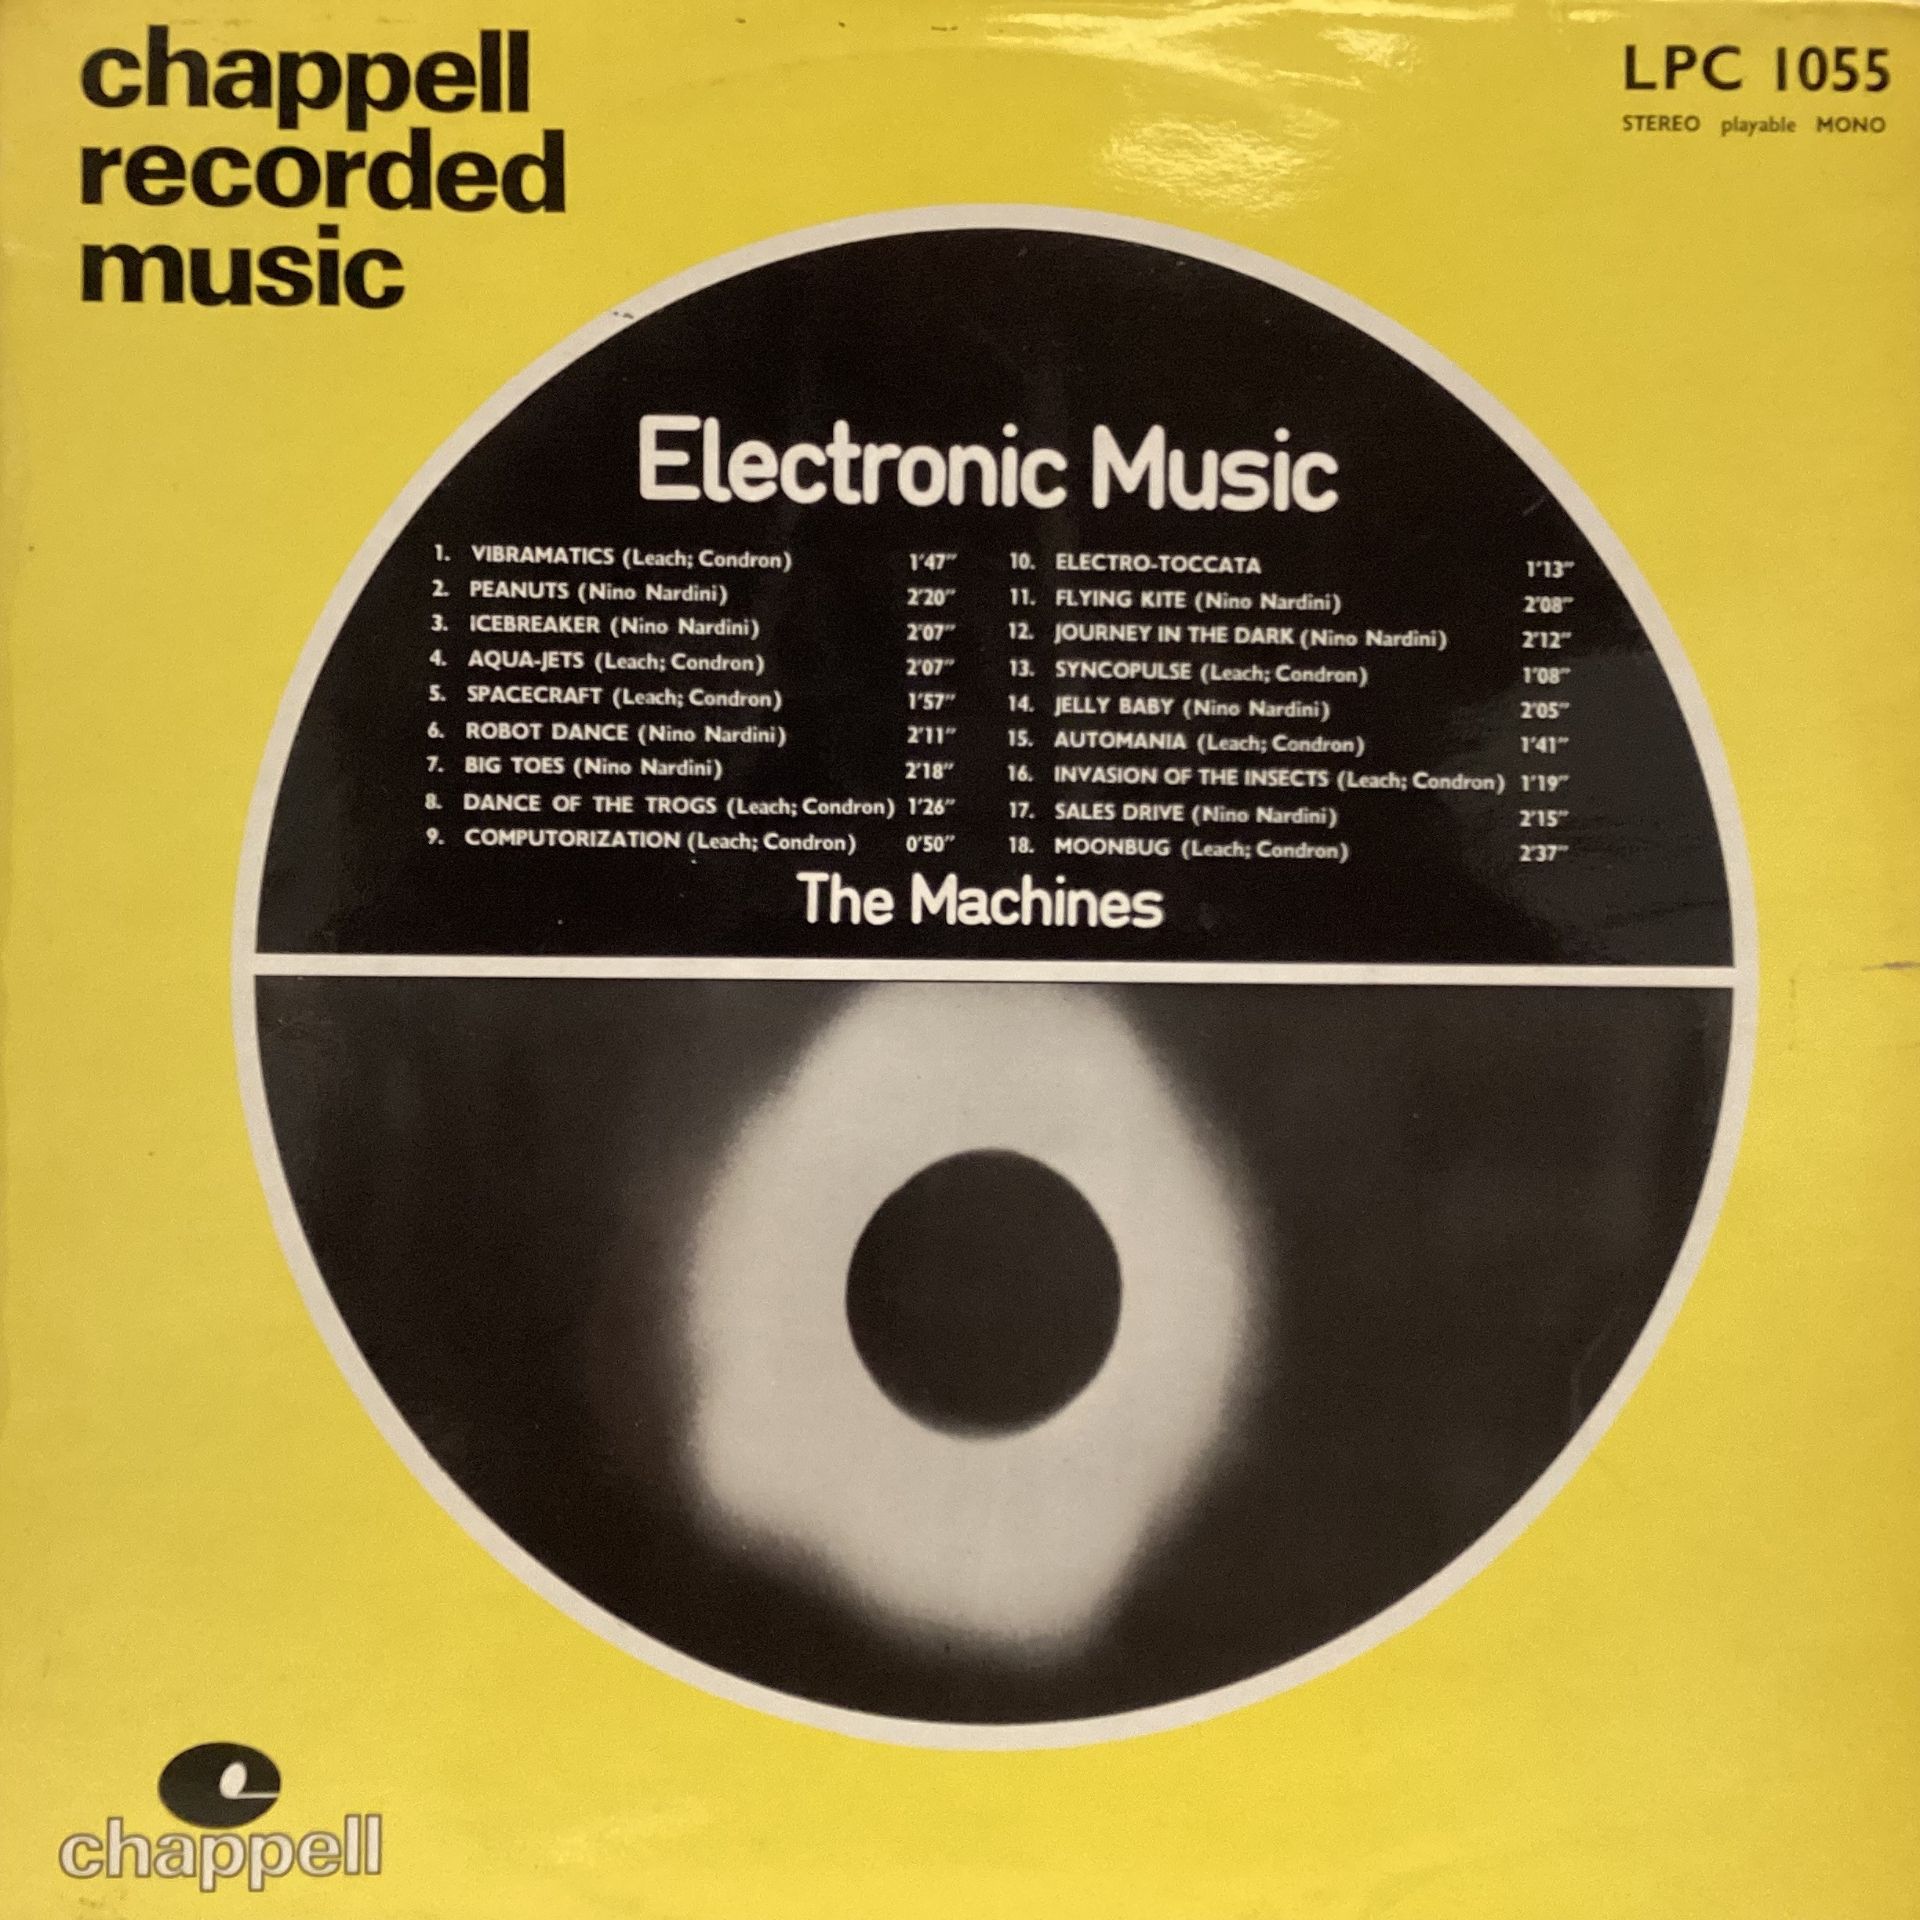 ELECTRONIC MUSIC VINYL LP RECORD. This vinyl is on Chappell Records No. LPC 1055 released in 1973